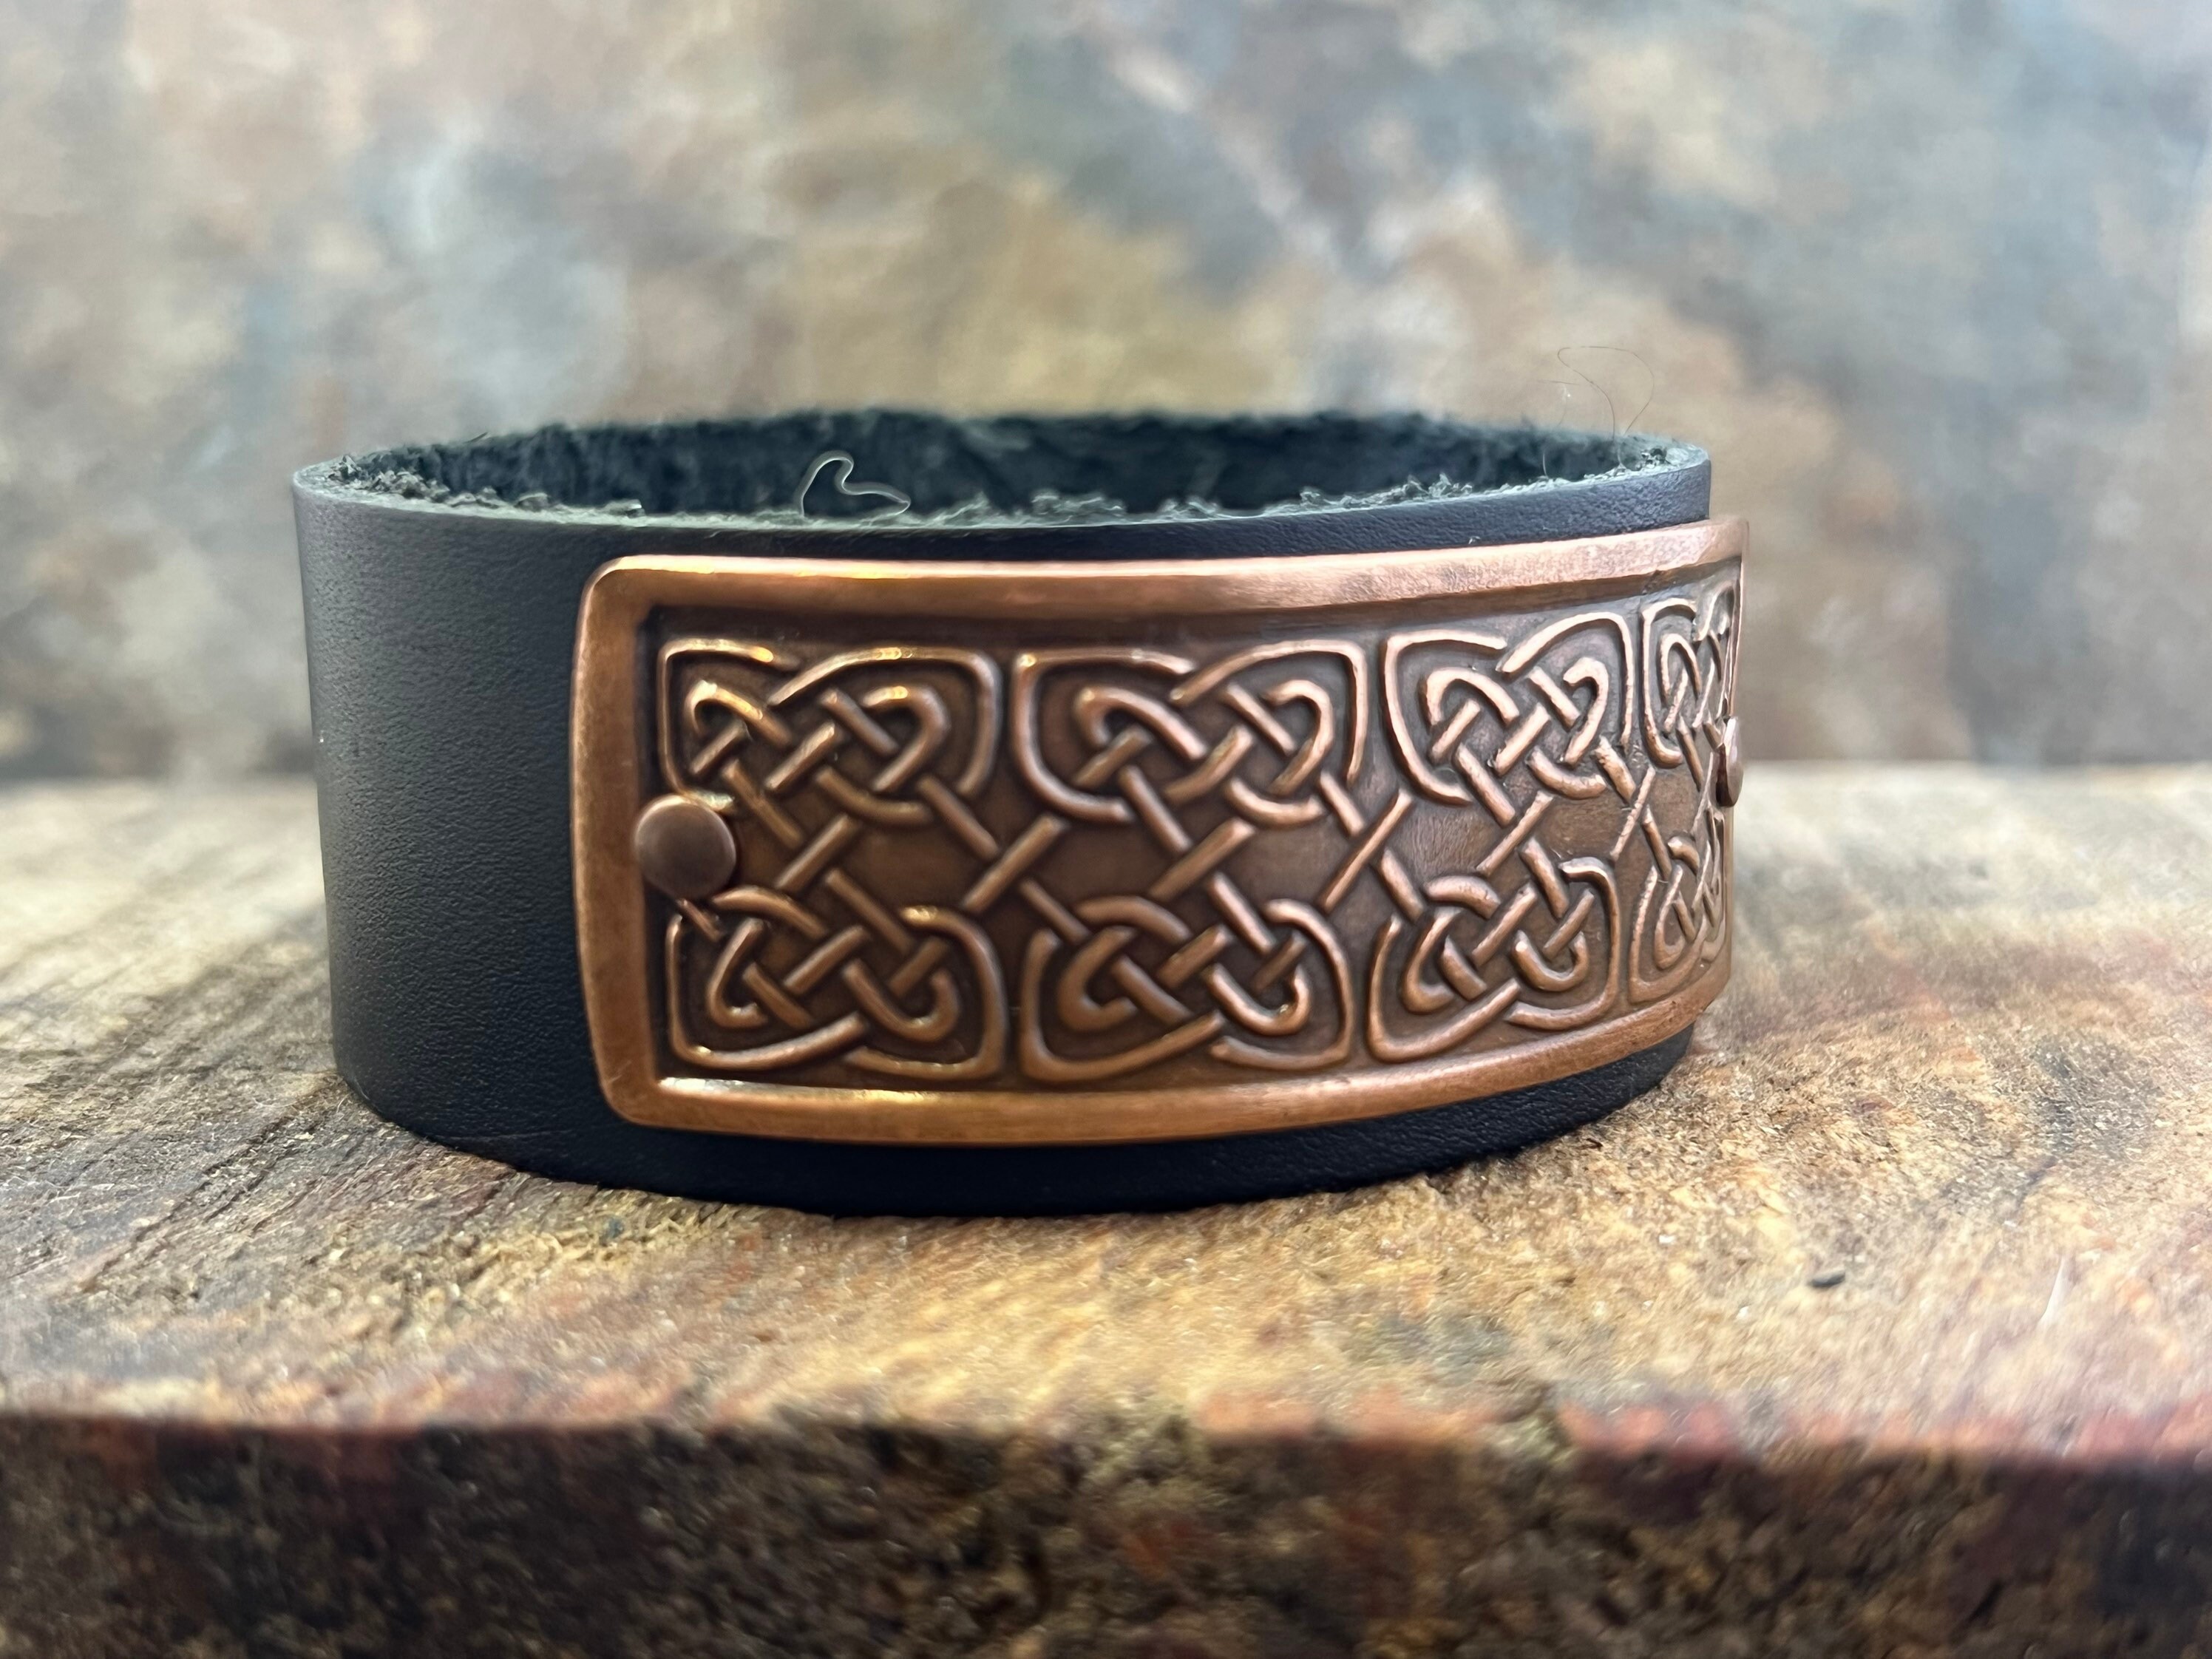 Tree of Life, Copper & Leather Cuff Bracelet, Unisex Jewelry, Hand Carved,  Brown Leather Adjustable Cuff, Size 6.75-8, Earthy Rustic Jewelry